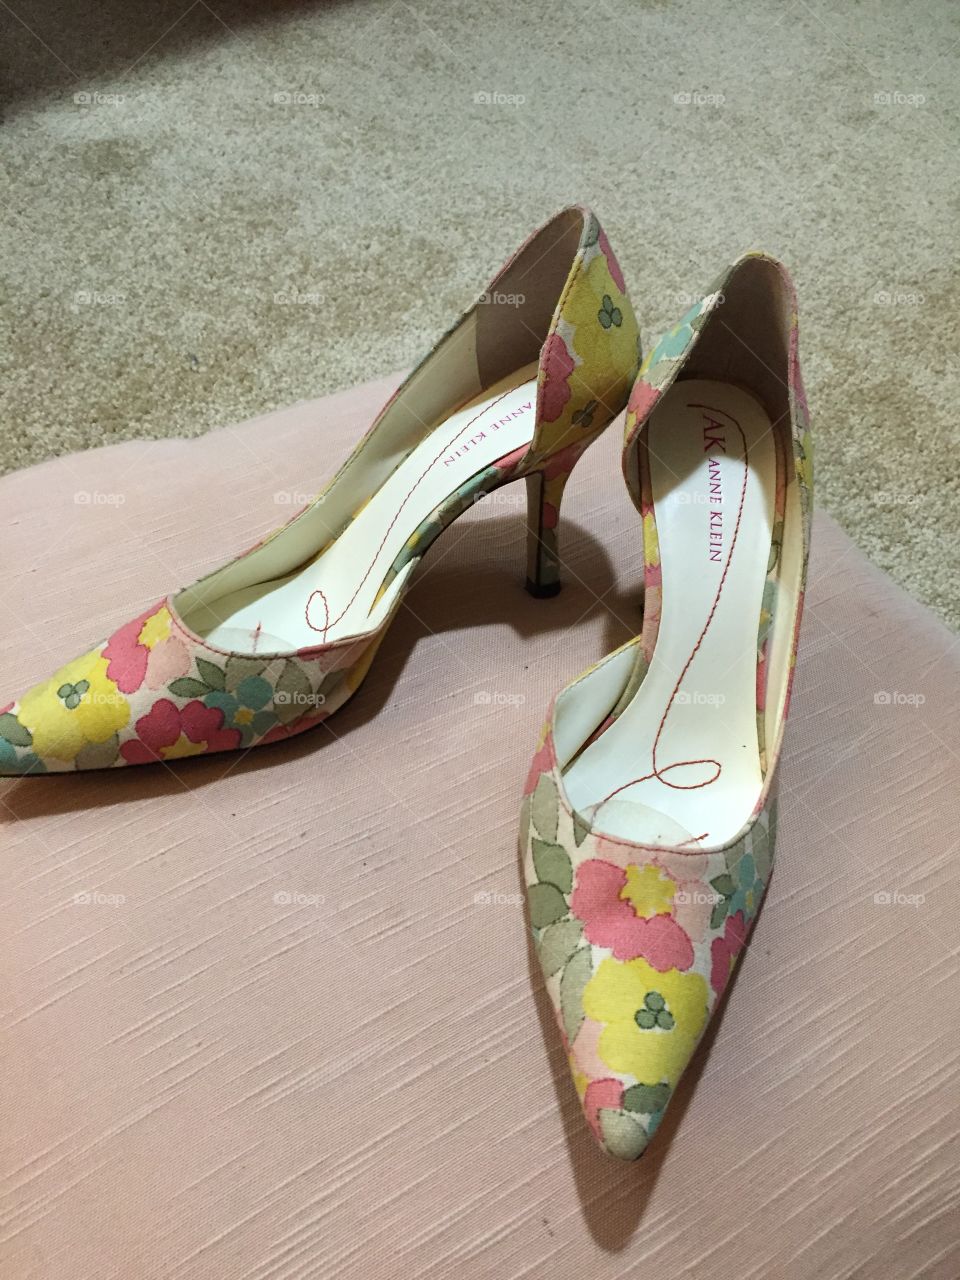 High heels, pump, floral heels, flower shoes, classy, classic, pointy toes, black, 3 inches, flowers, pretty shoes, summer shoes 